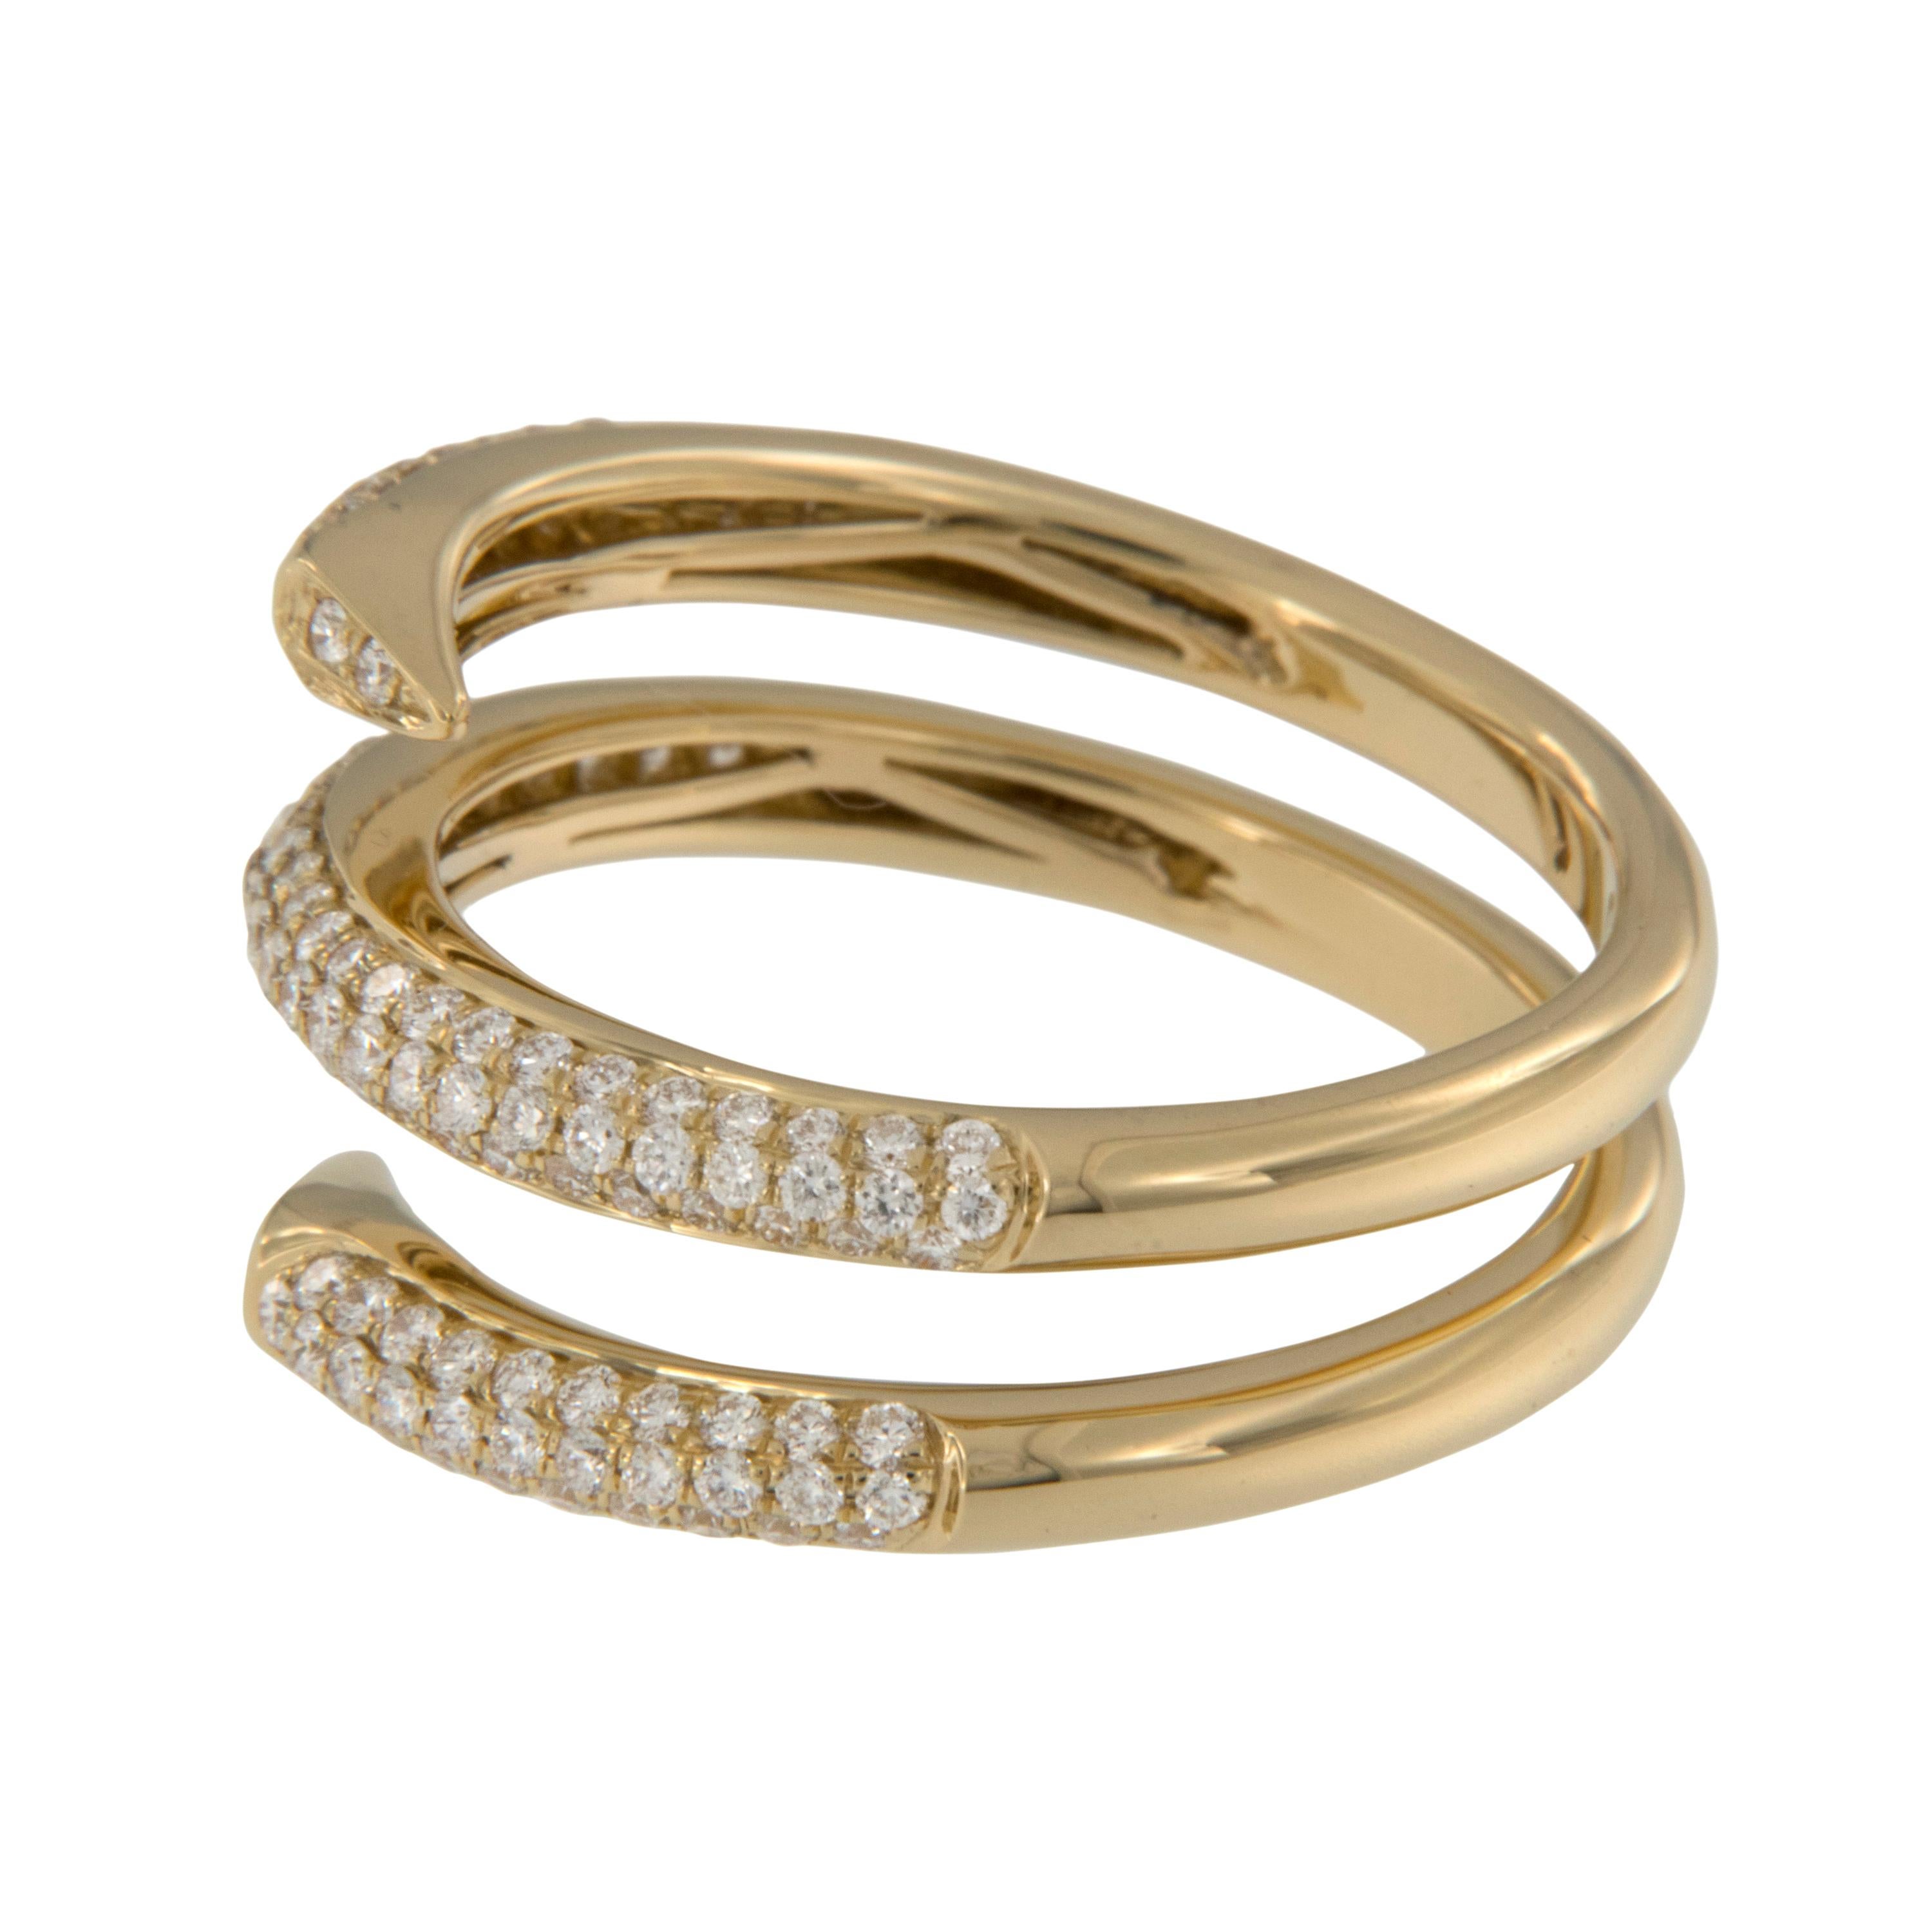 This stylish royal 18 karat yellow gold wrap around spiral ring is further accented with fine 0.67 Cttw pave' set diamonds for an eye catching look! Fantastic fashion ring or contemporary wedding band  in a size 6.5. Complimentary signature wrapping